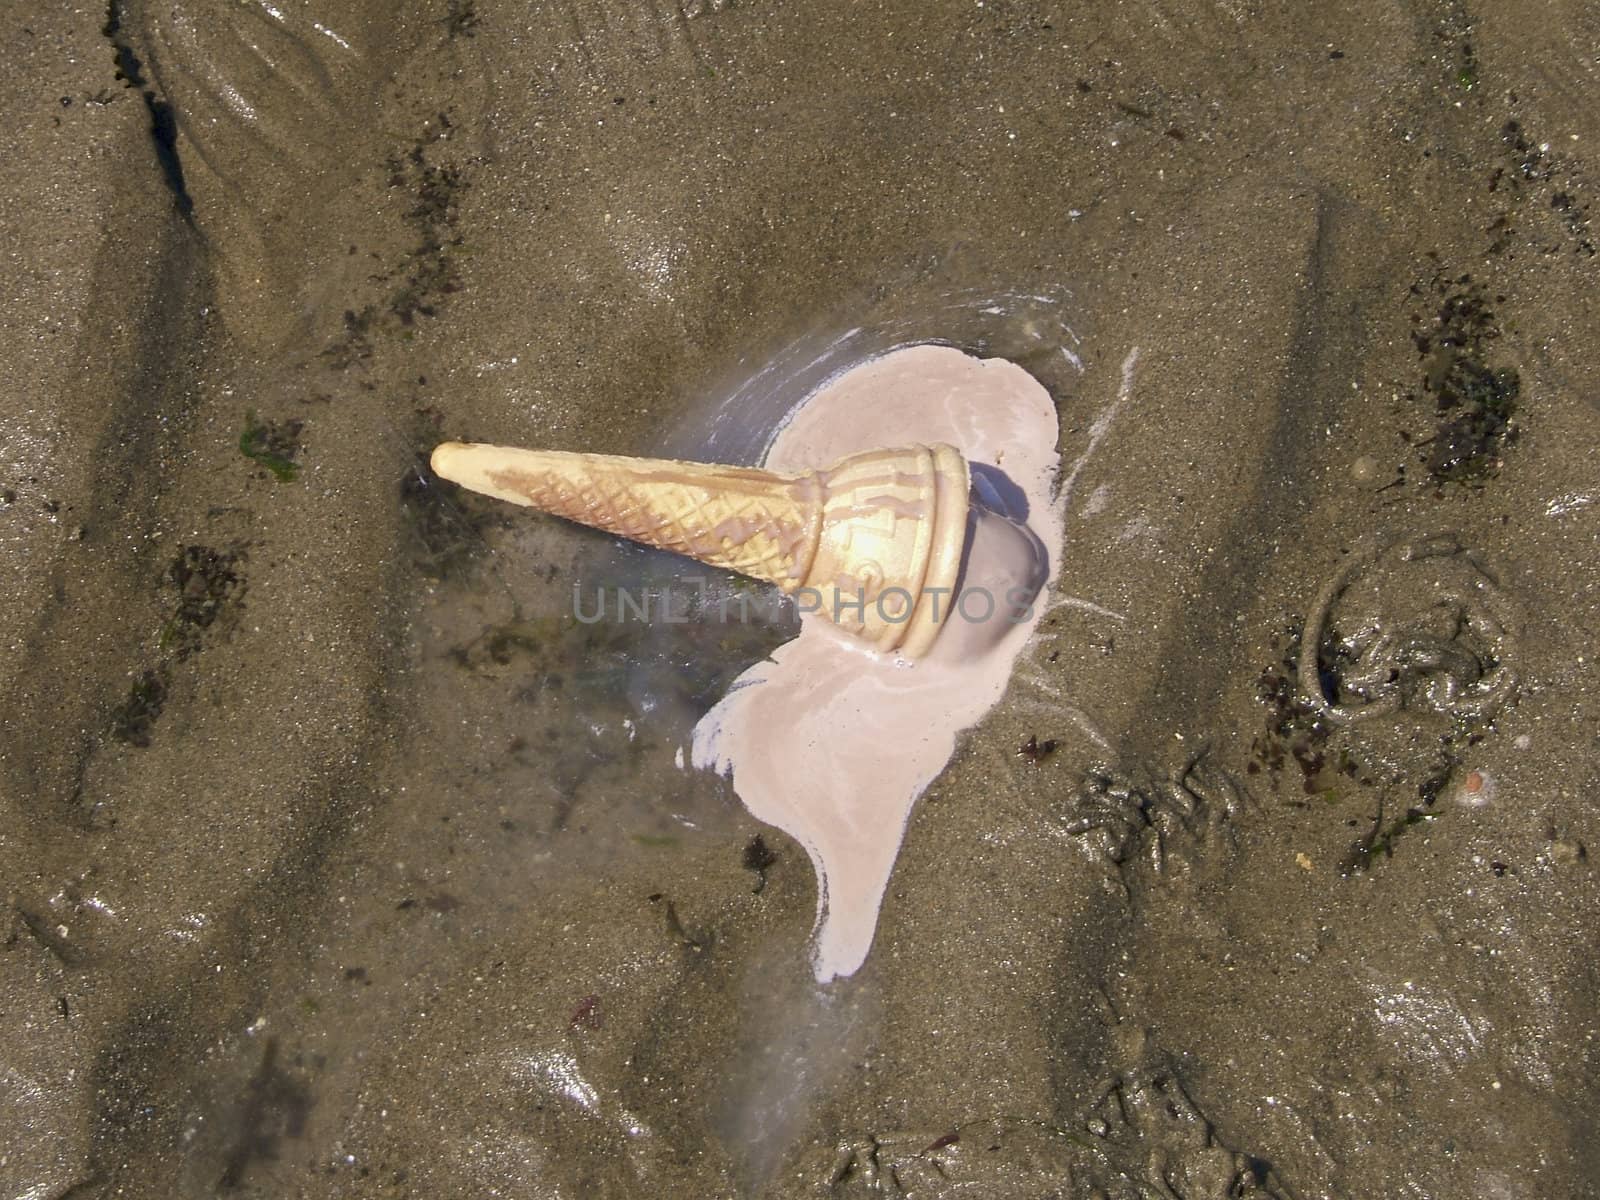 A pink ice cream dropped on the beach